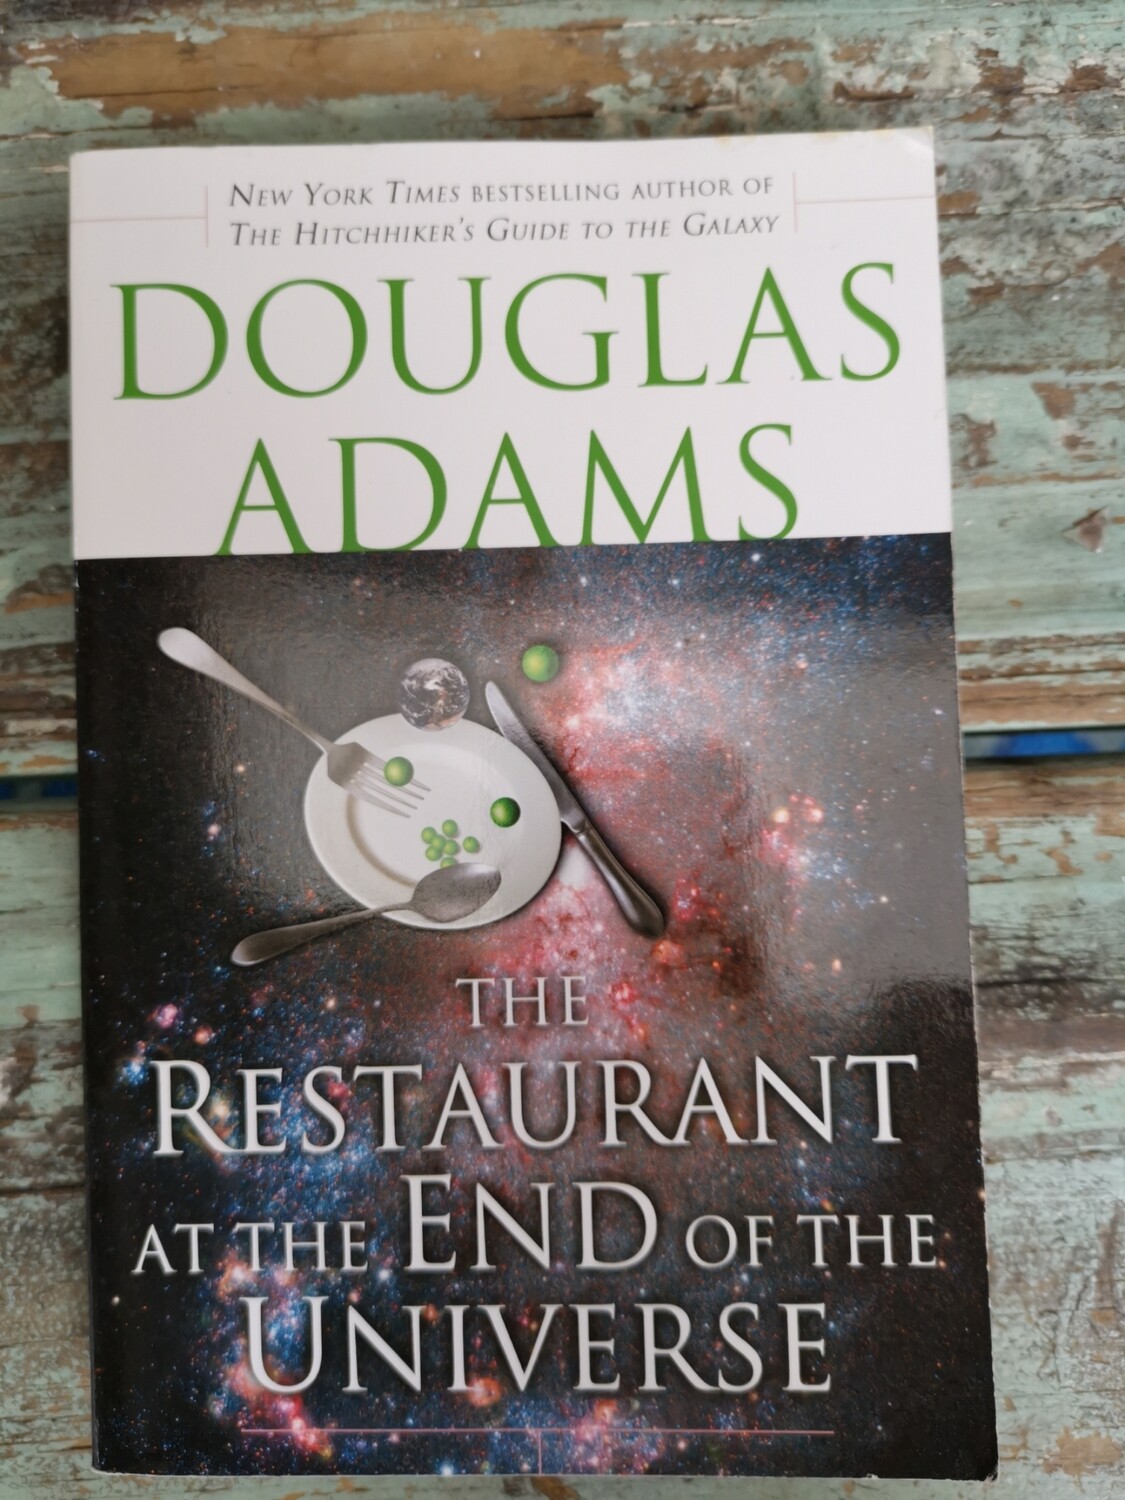 The restaurant at the end of the universe, Douglas Adams